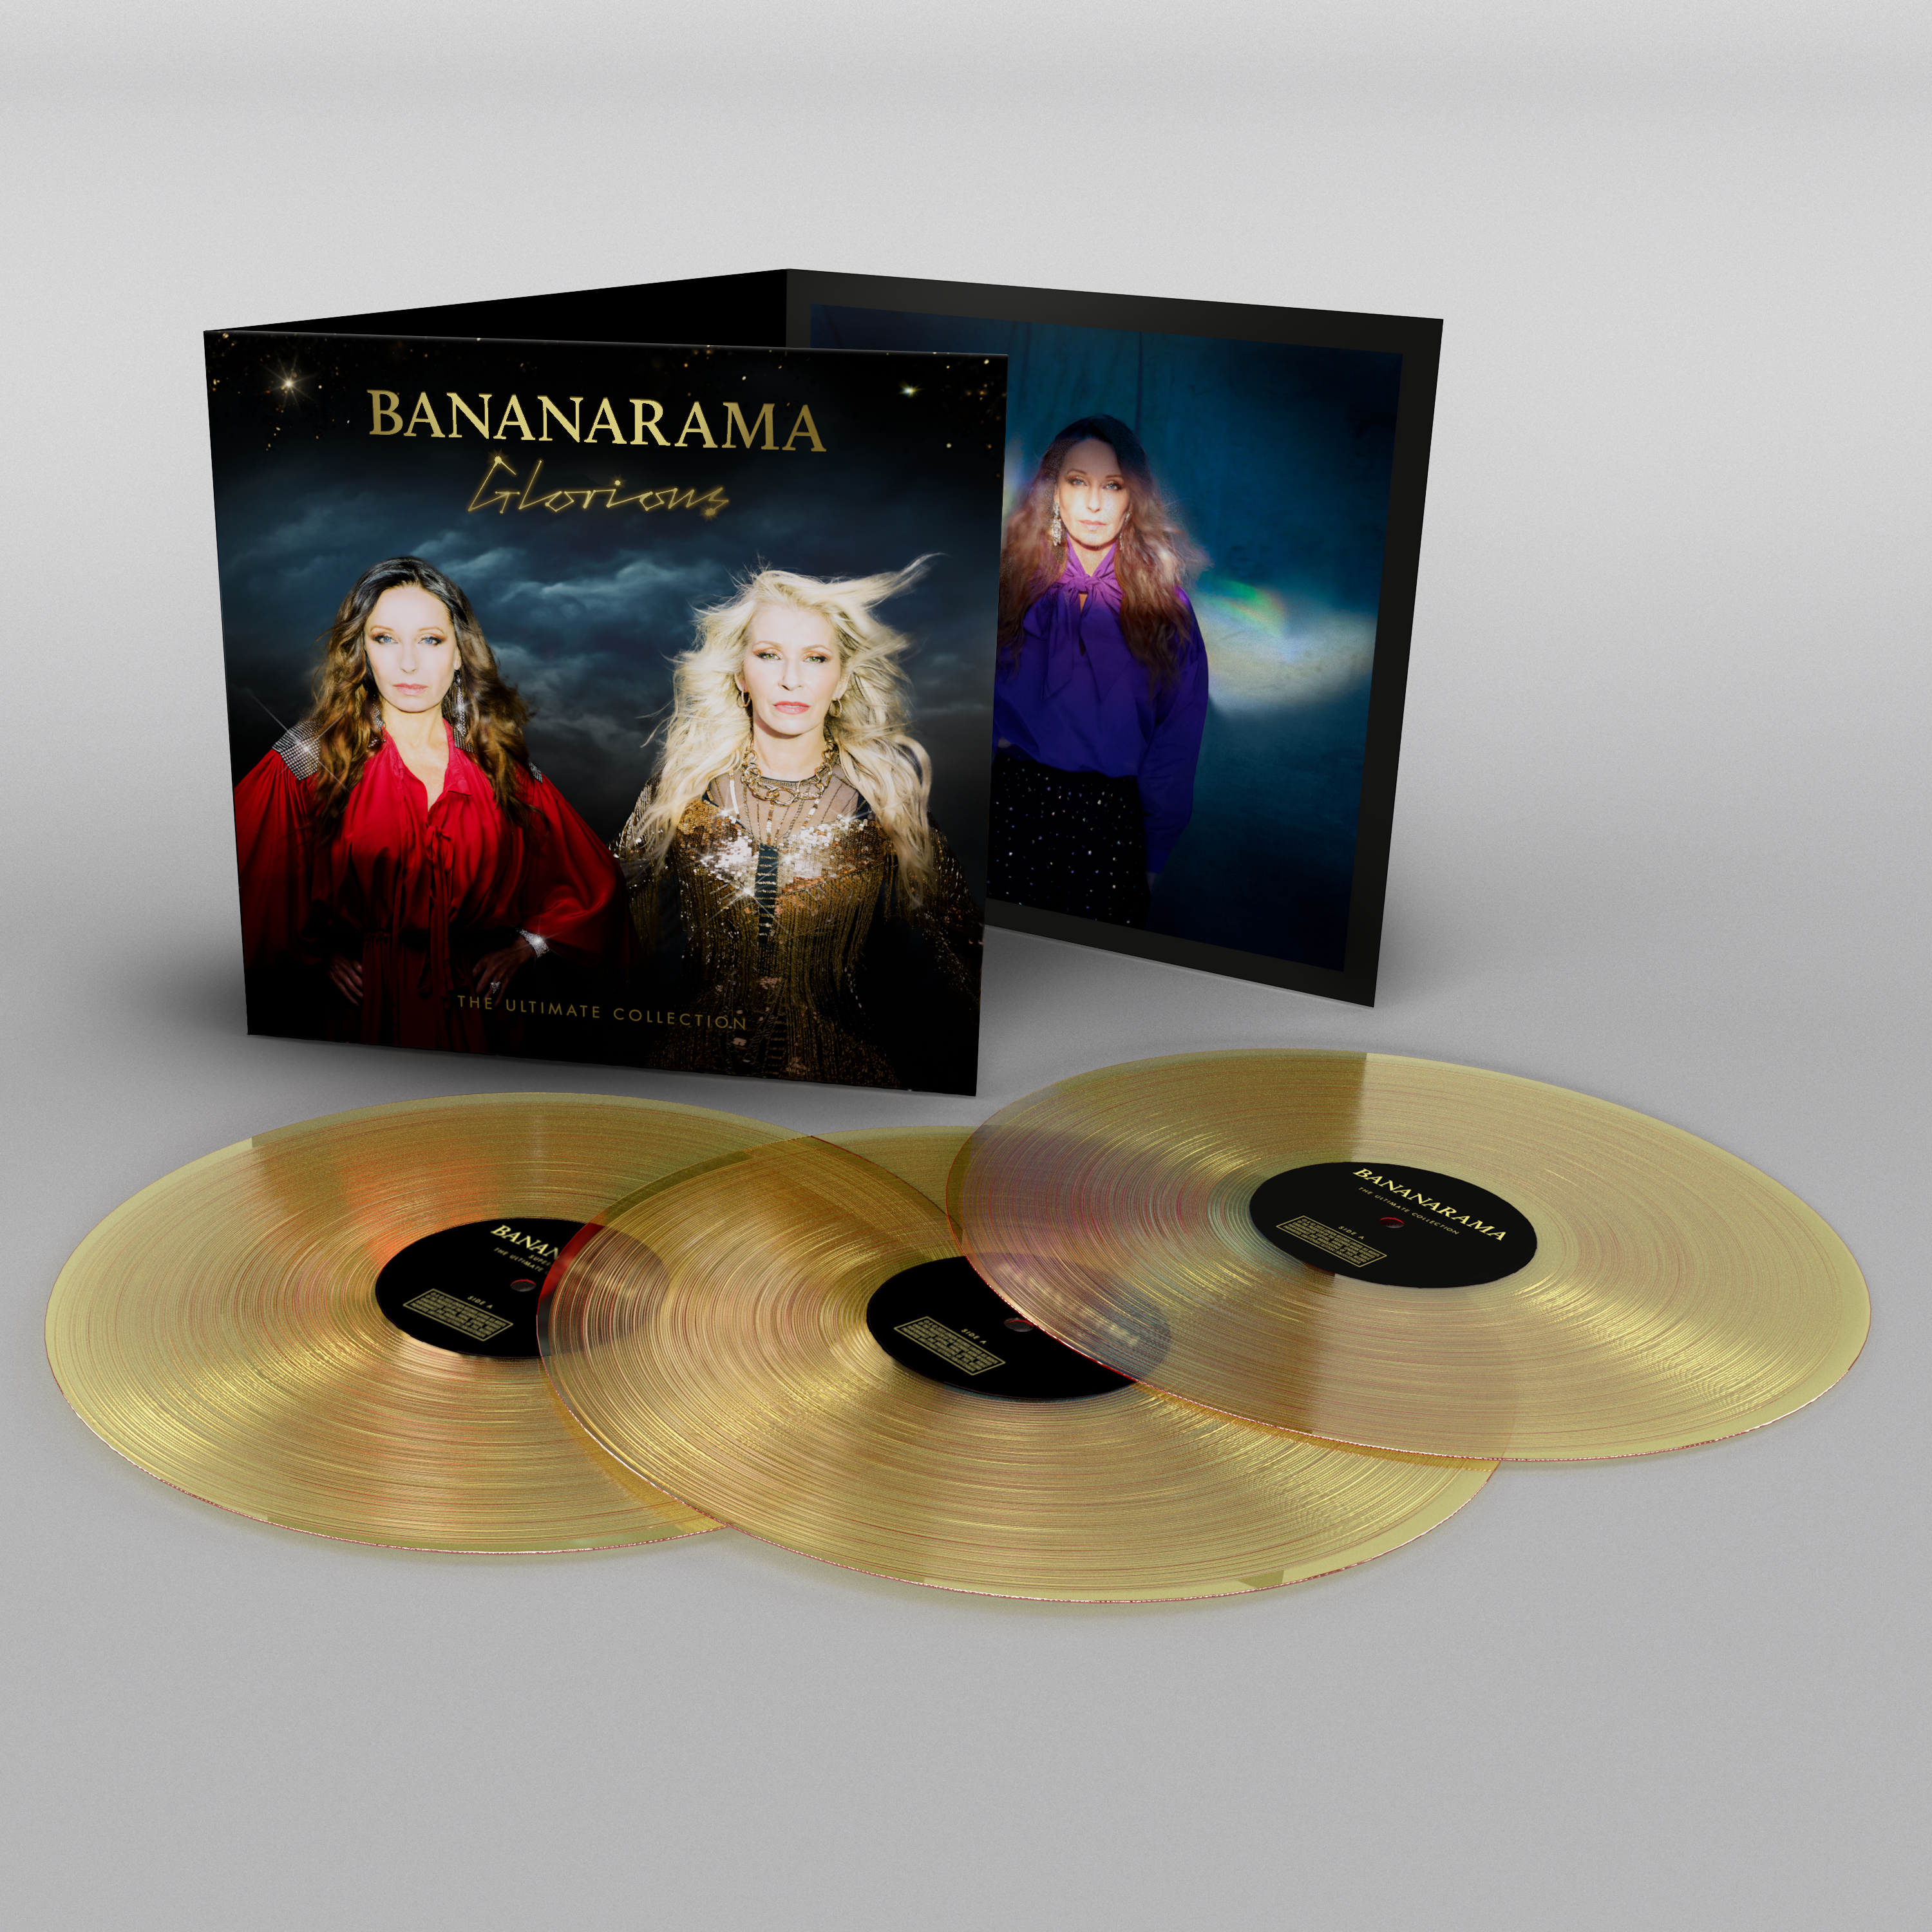 Bananarama - Glorious - The Ultimate Collection: Transparent Gold Vinyl LP (Collector's Edition)